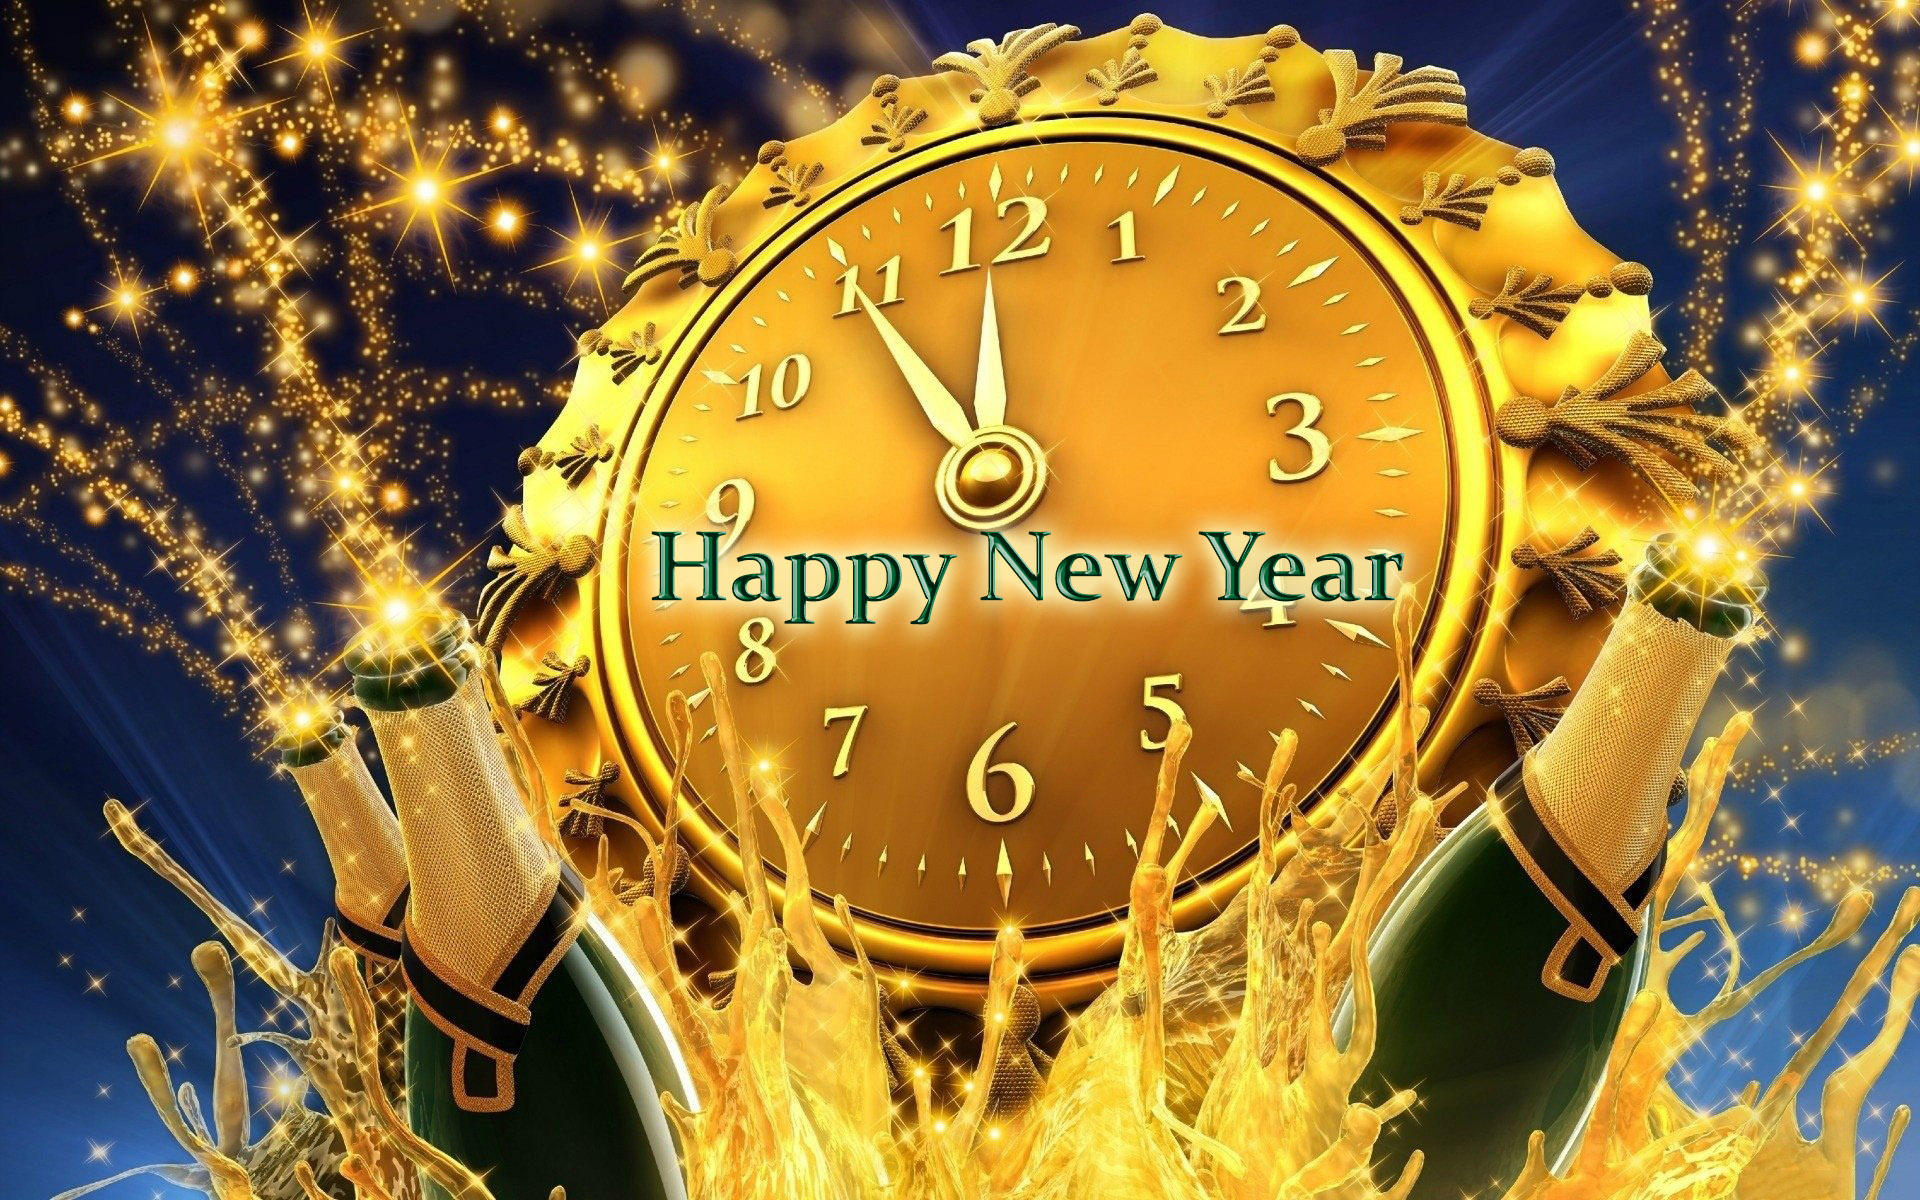 Happy New Year 2019 Images Hd